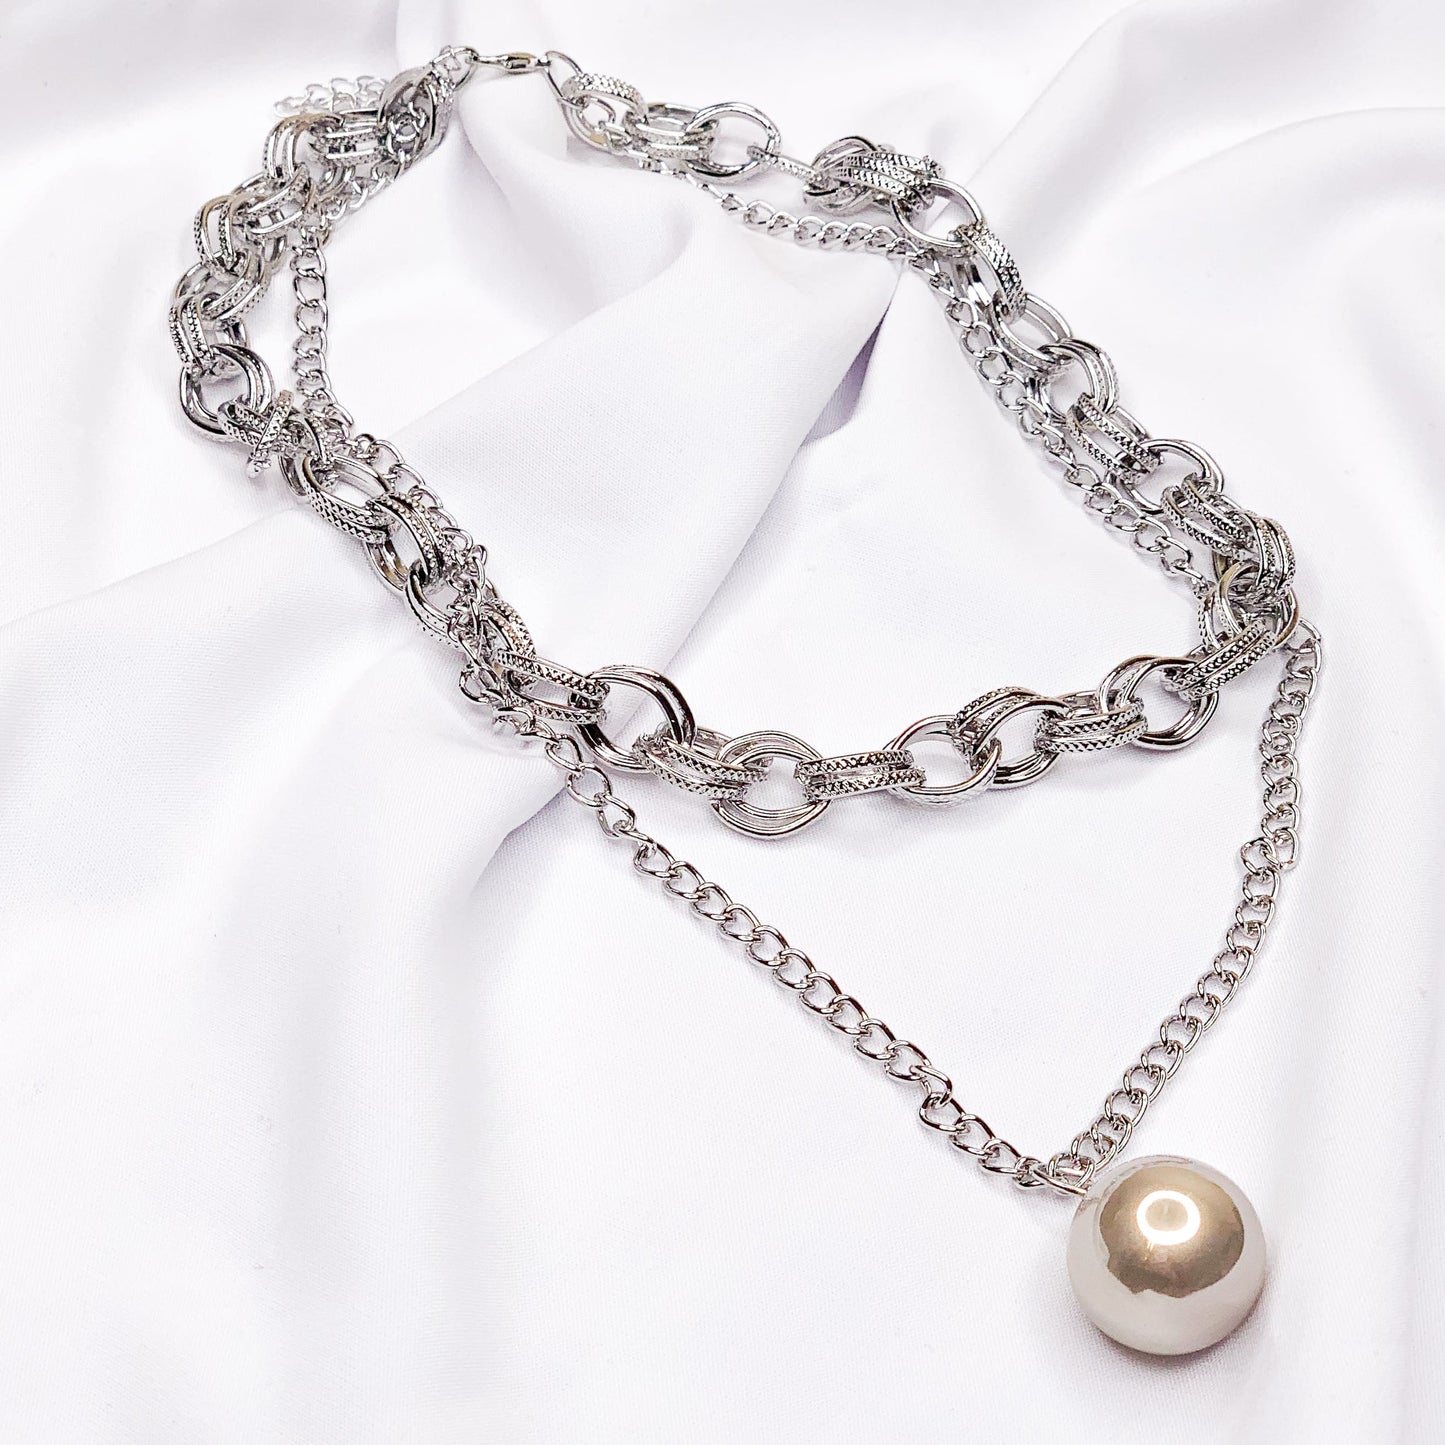 Silver Chain necklace with ball pendant